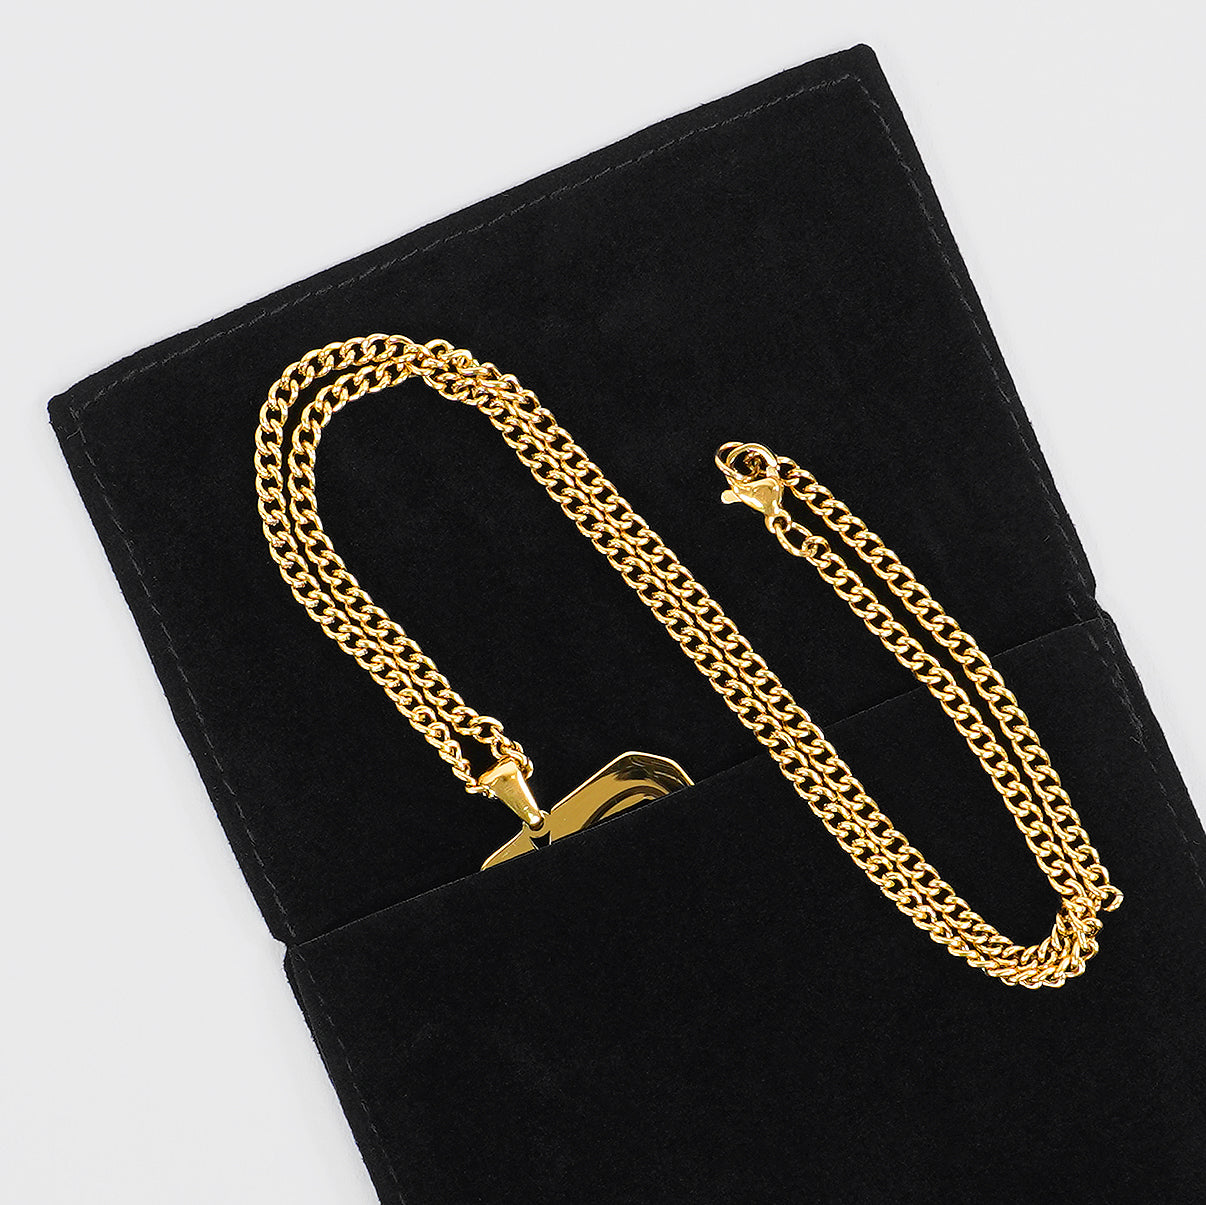 62 Number Pendant with Chain Necklace - Gold Plated Stainless Steel